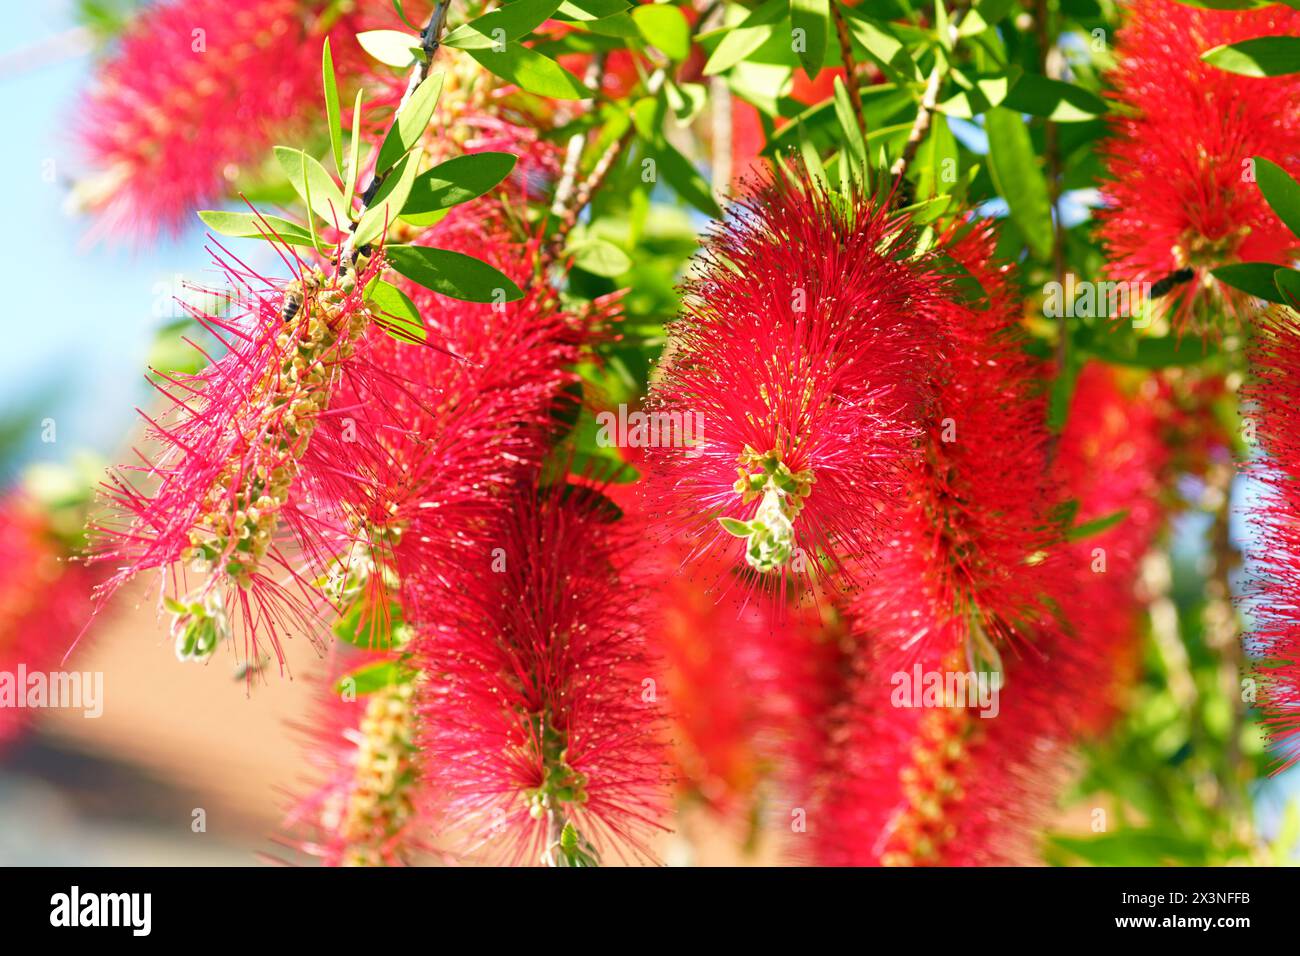 Inflorescences of the Callistemon plant from the Myrtaceae family, photographed at close range on a sunny day Stock Photo